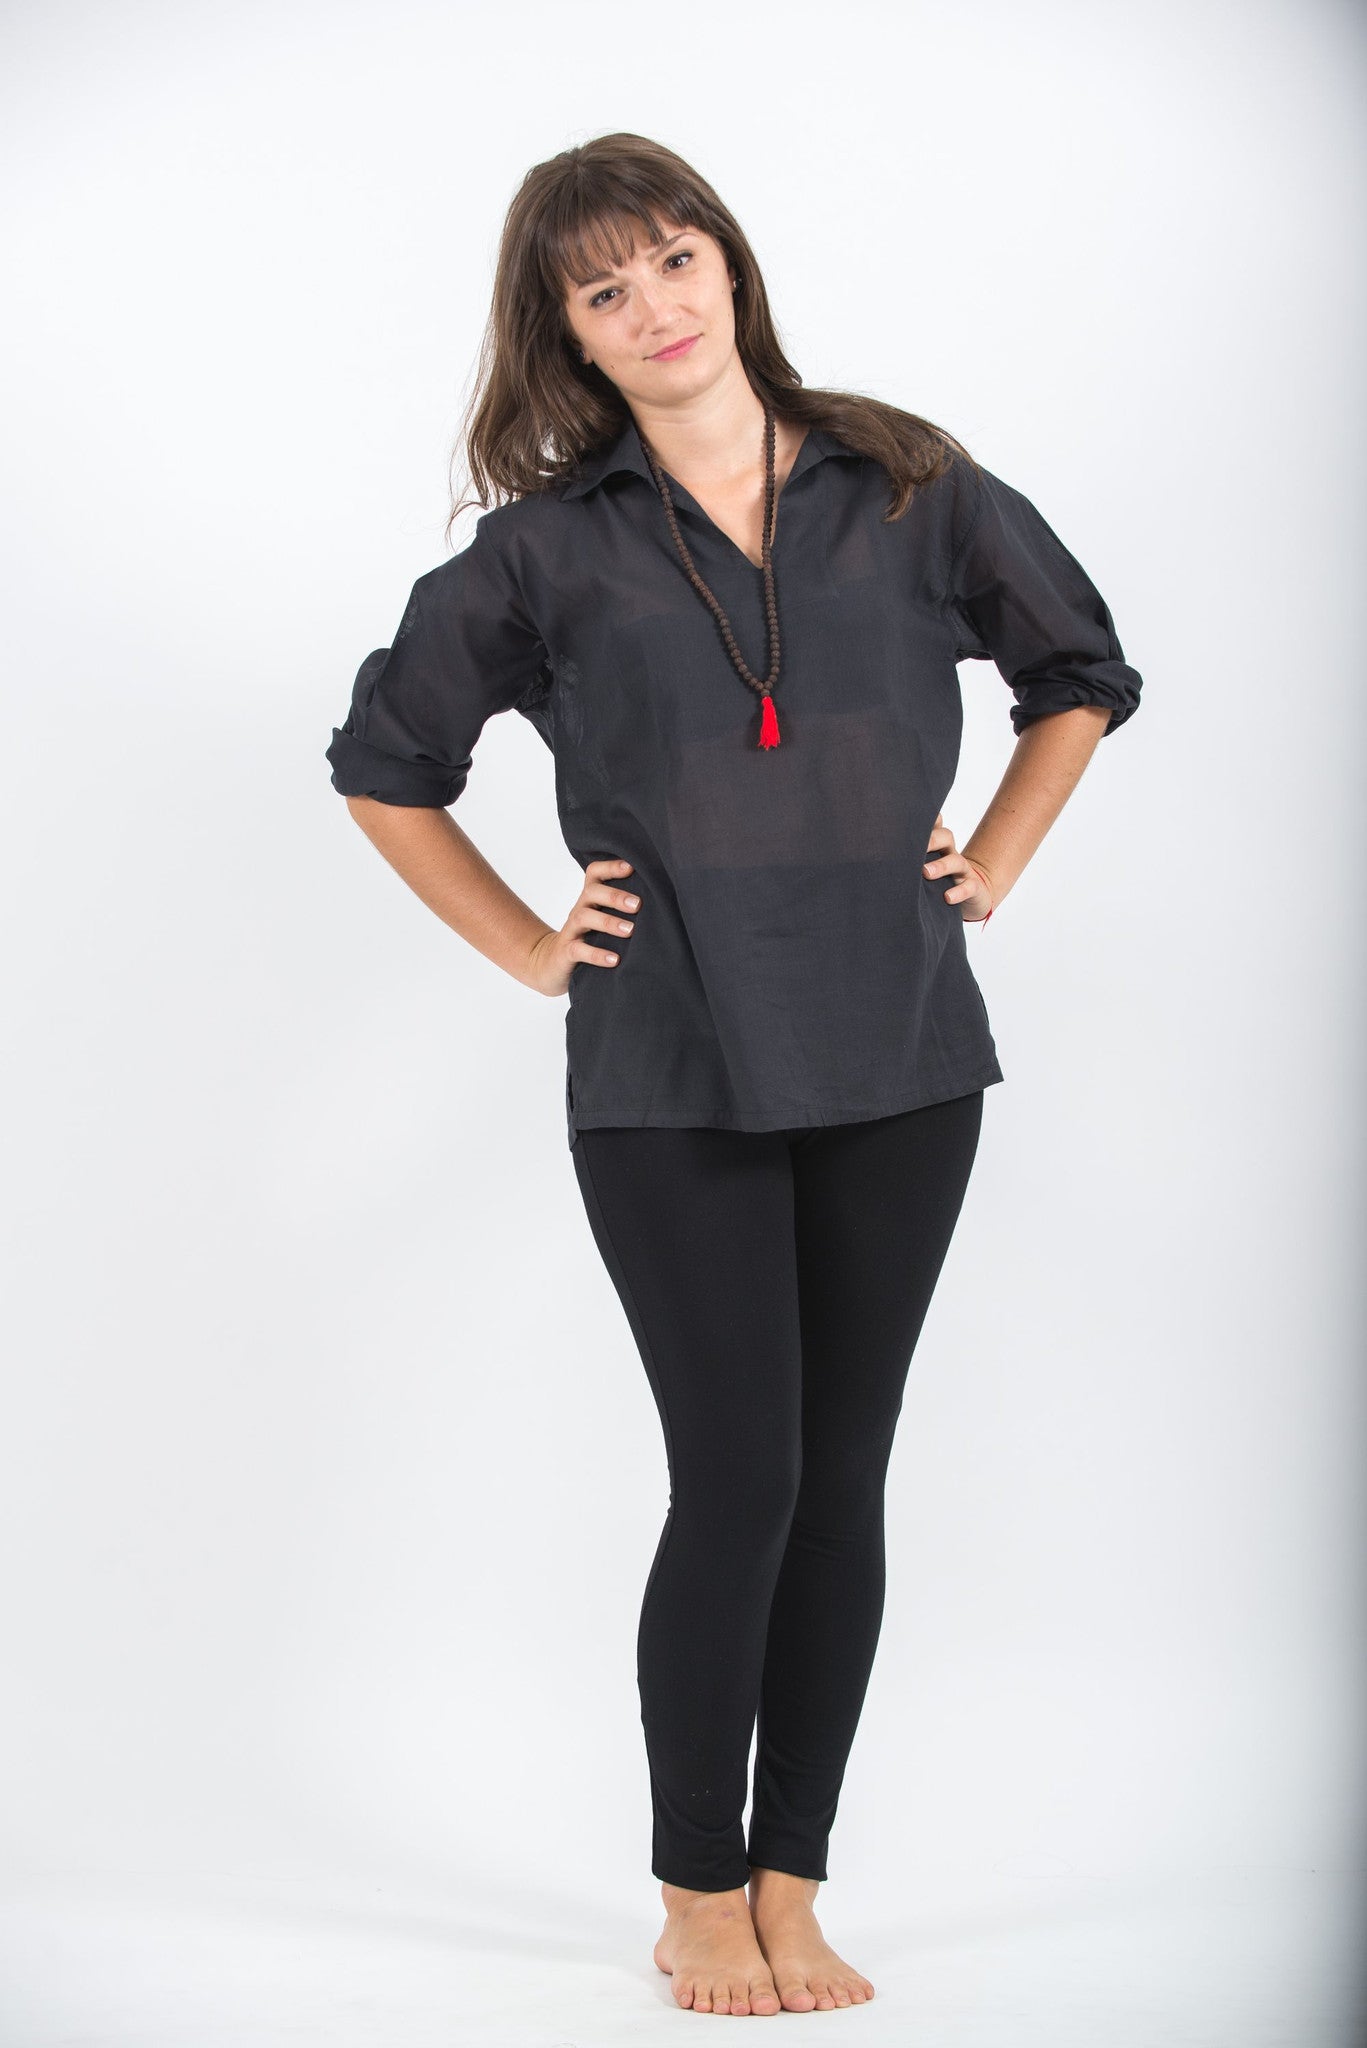 Womens Yoga Shirts No Collar with Coconut Buttons in Black – Harem Pants